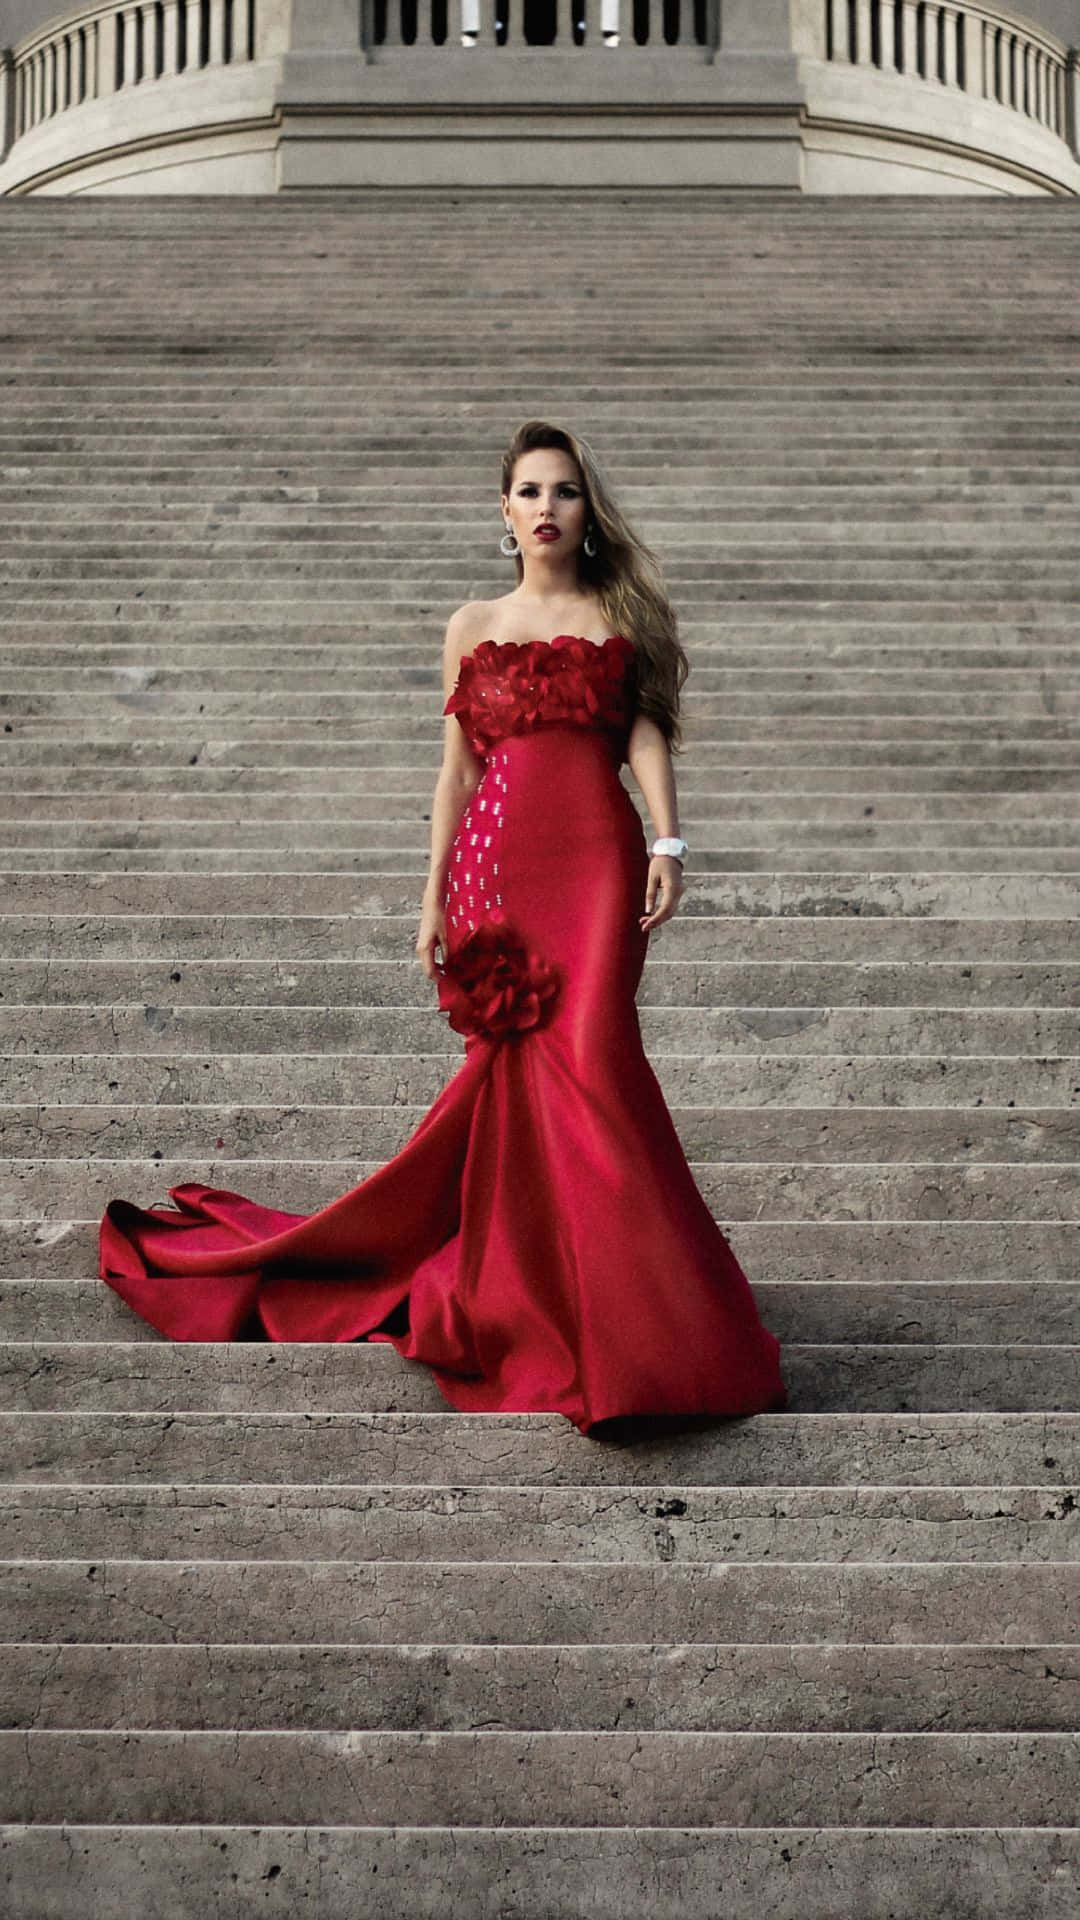 Elegant Red Gown Staircase Pose Wallpaper